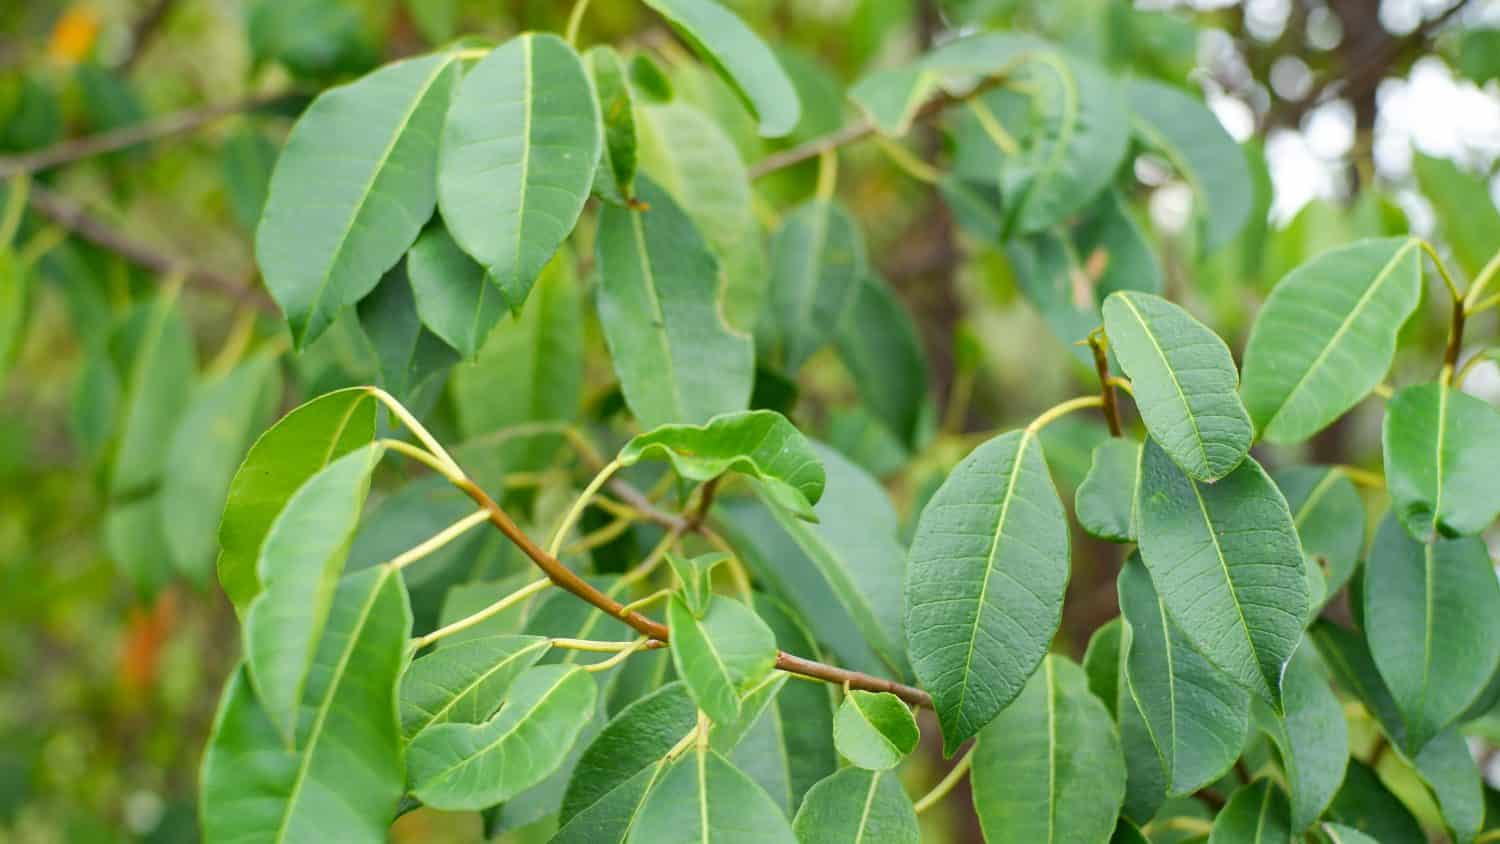 Excoecaria agallocha, a species of mangrove, belongs to the genus Excoecaria of the family Euphorbiaceae. This species has many common names, including blind eye mangrove, blind tree, blind blind tree